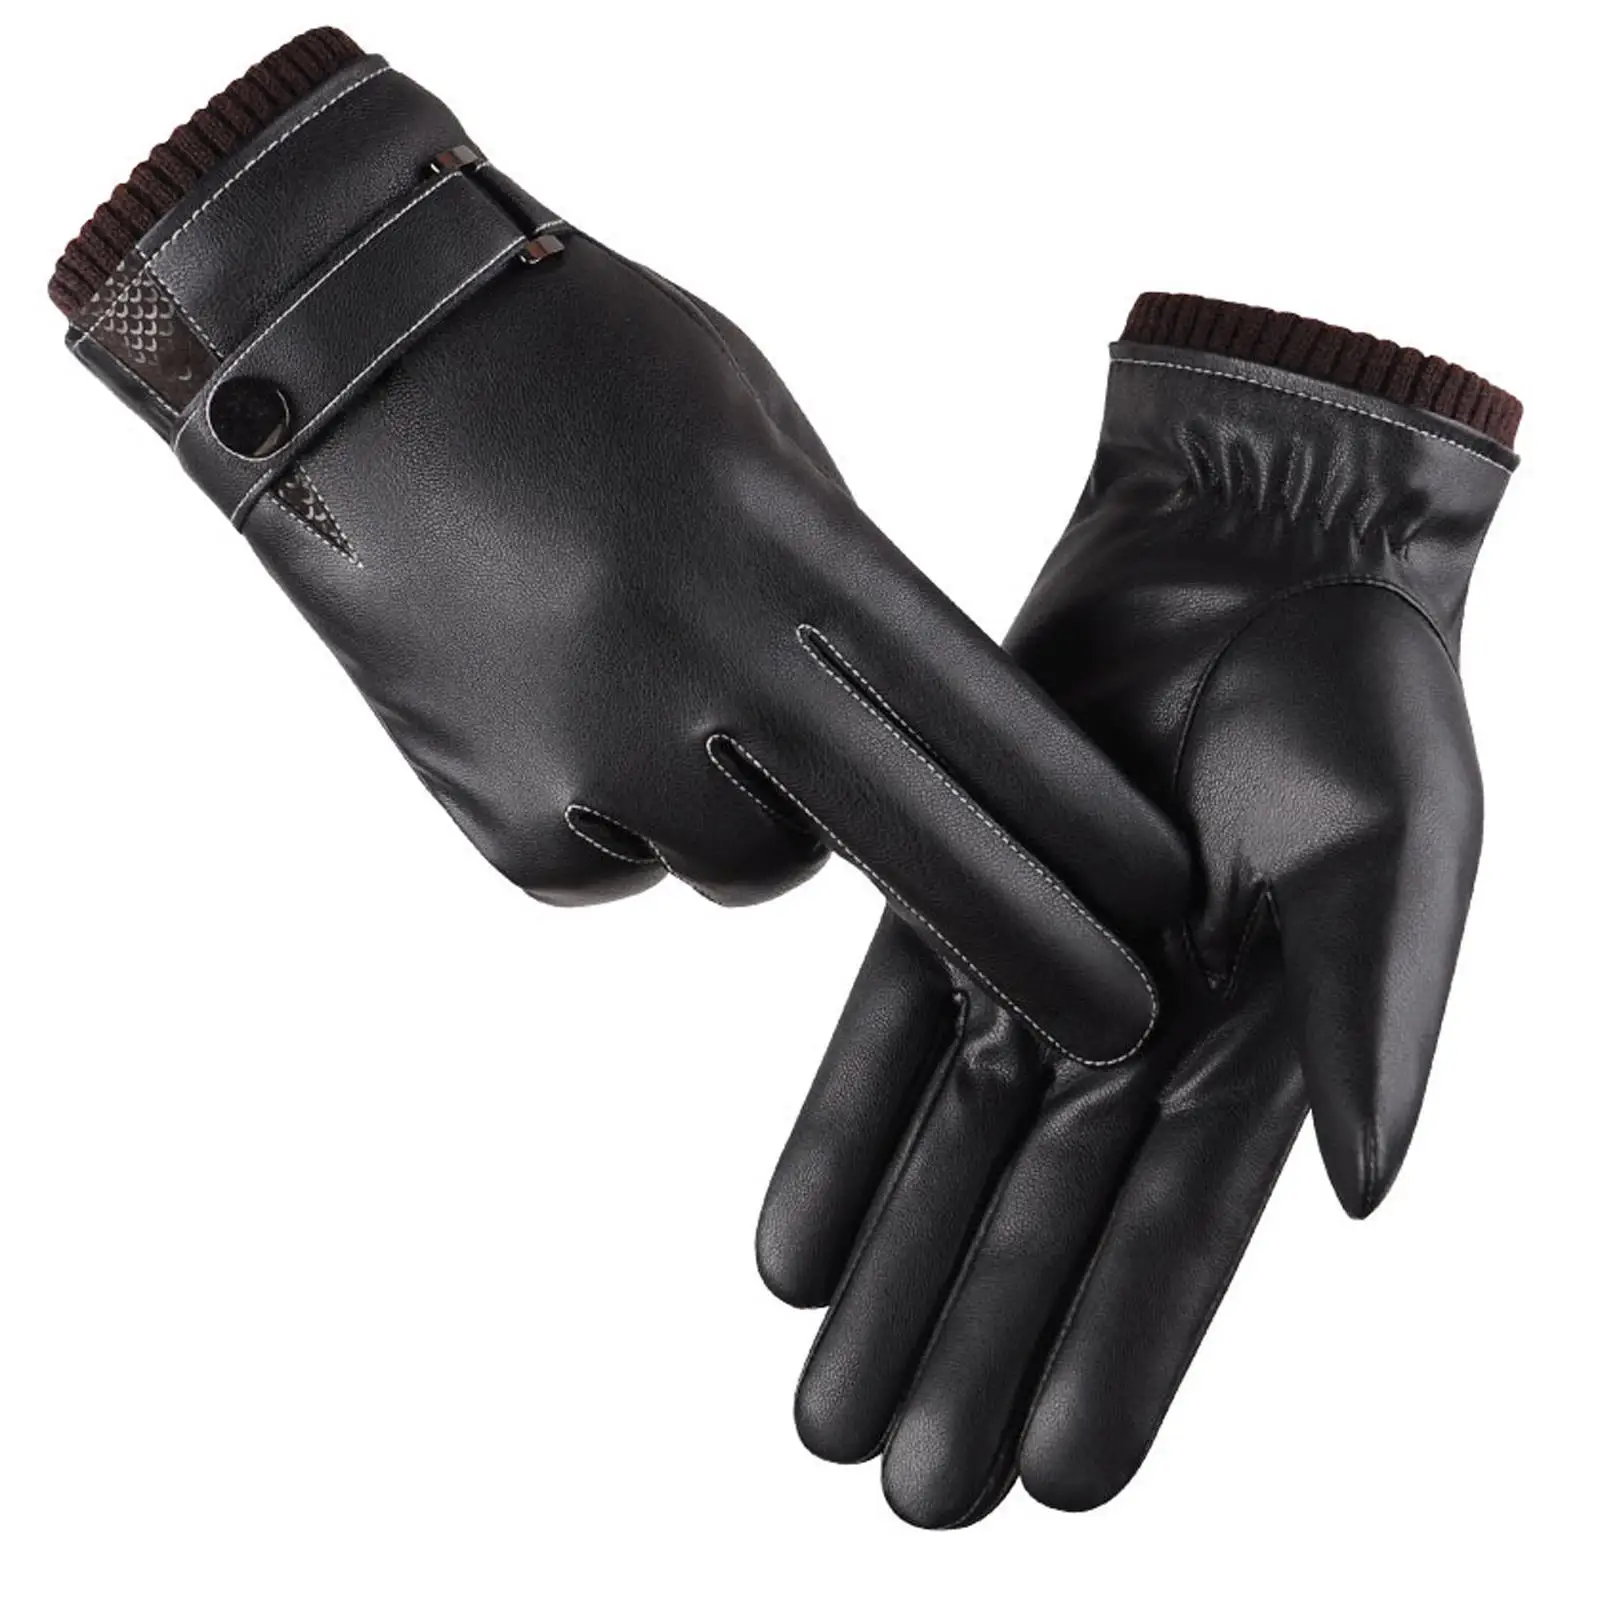 Touch Screen Glove PU Leather Warm Mittens Autumn Full Finger Plush Lining Winter Gloves for Skiing Motorcycle Cycling Hiking